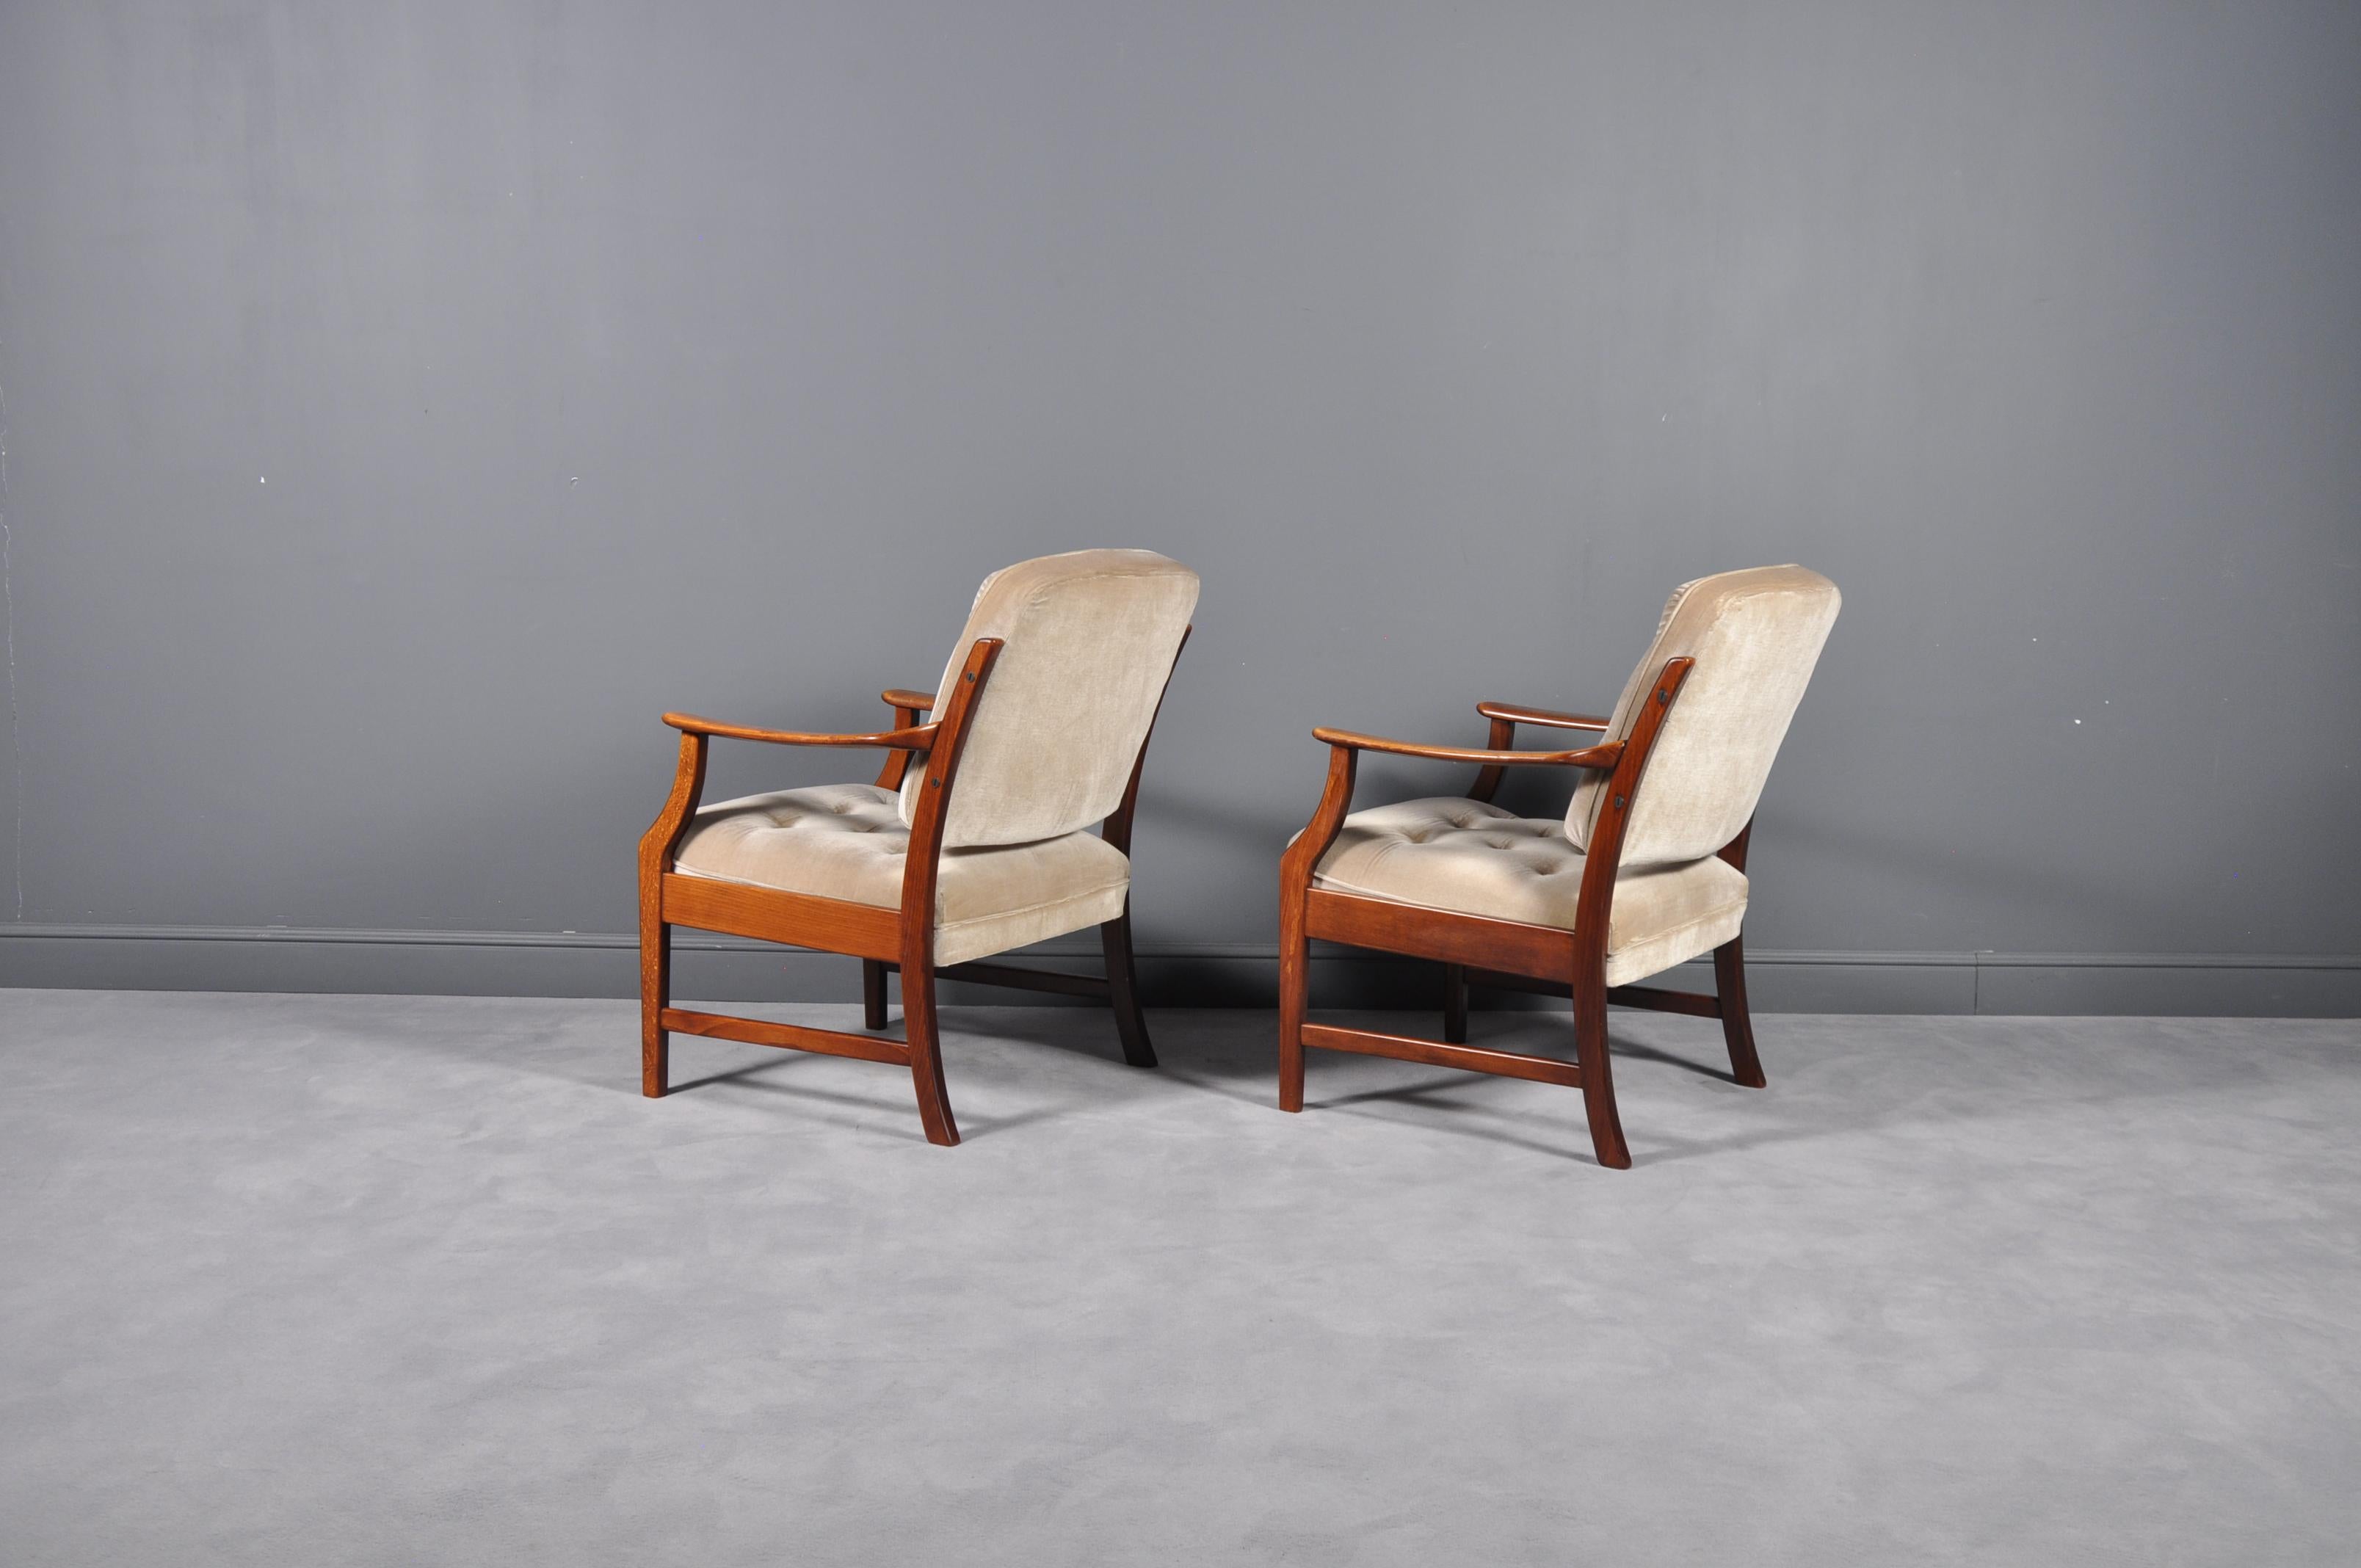 Scandinavian Modern Pair of Two Danish Midcentury Modern Arm Dining Chairs, 1960s For Sale